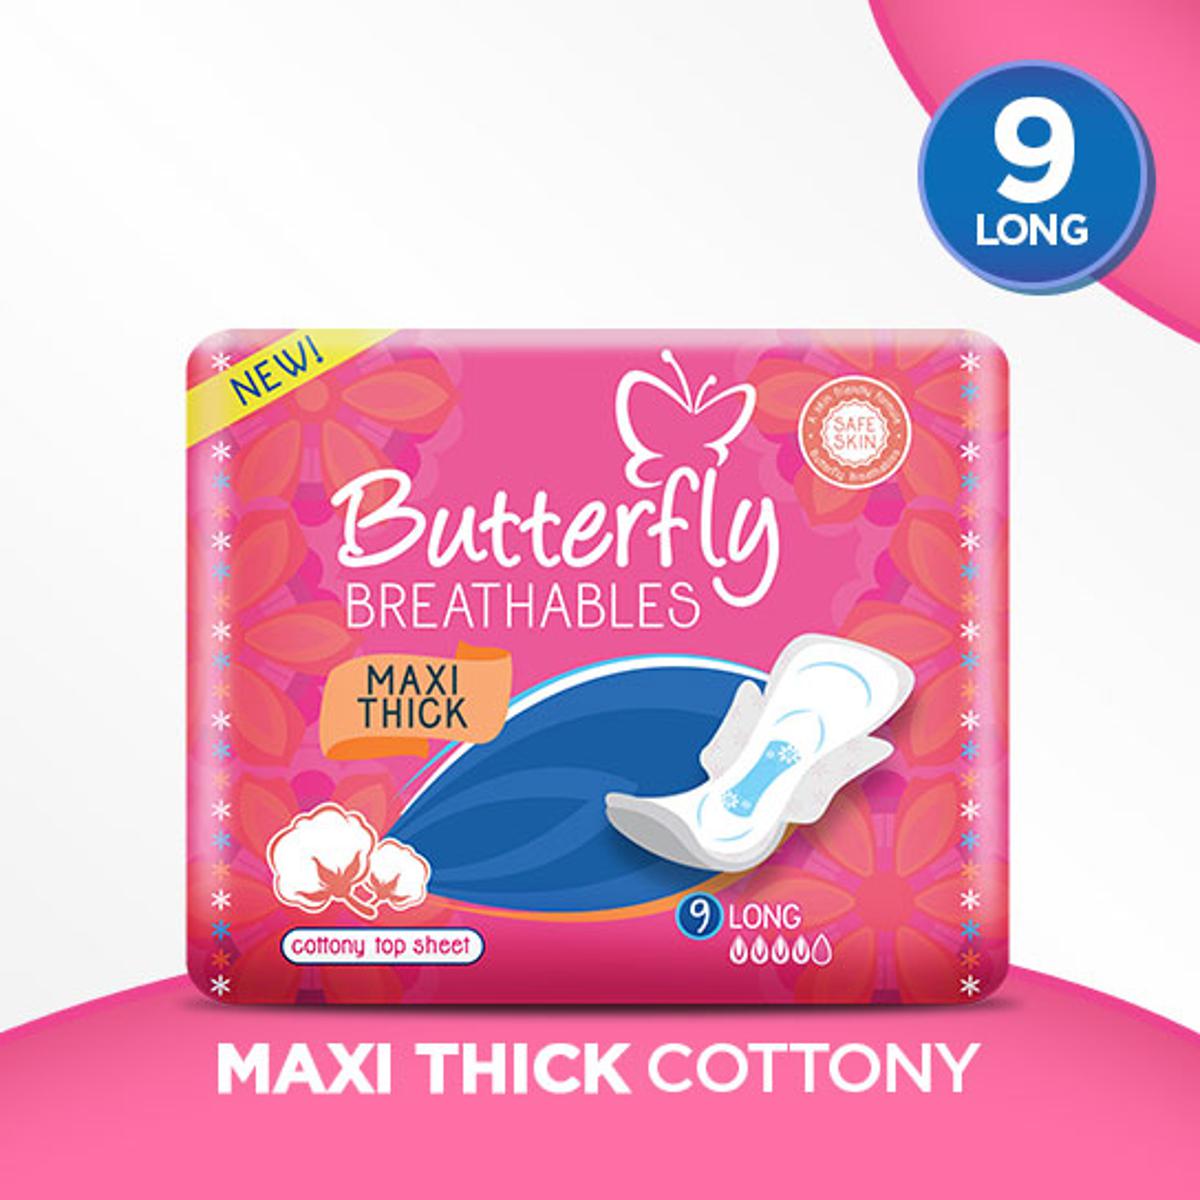 Butterfly Breathable Maxi Thick Cottony Soft Sanitary Pad